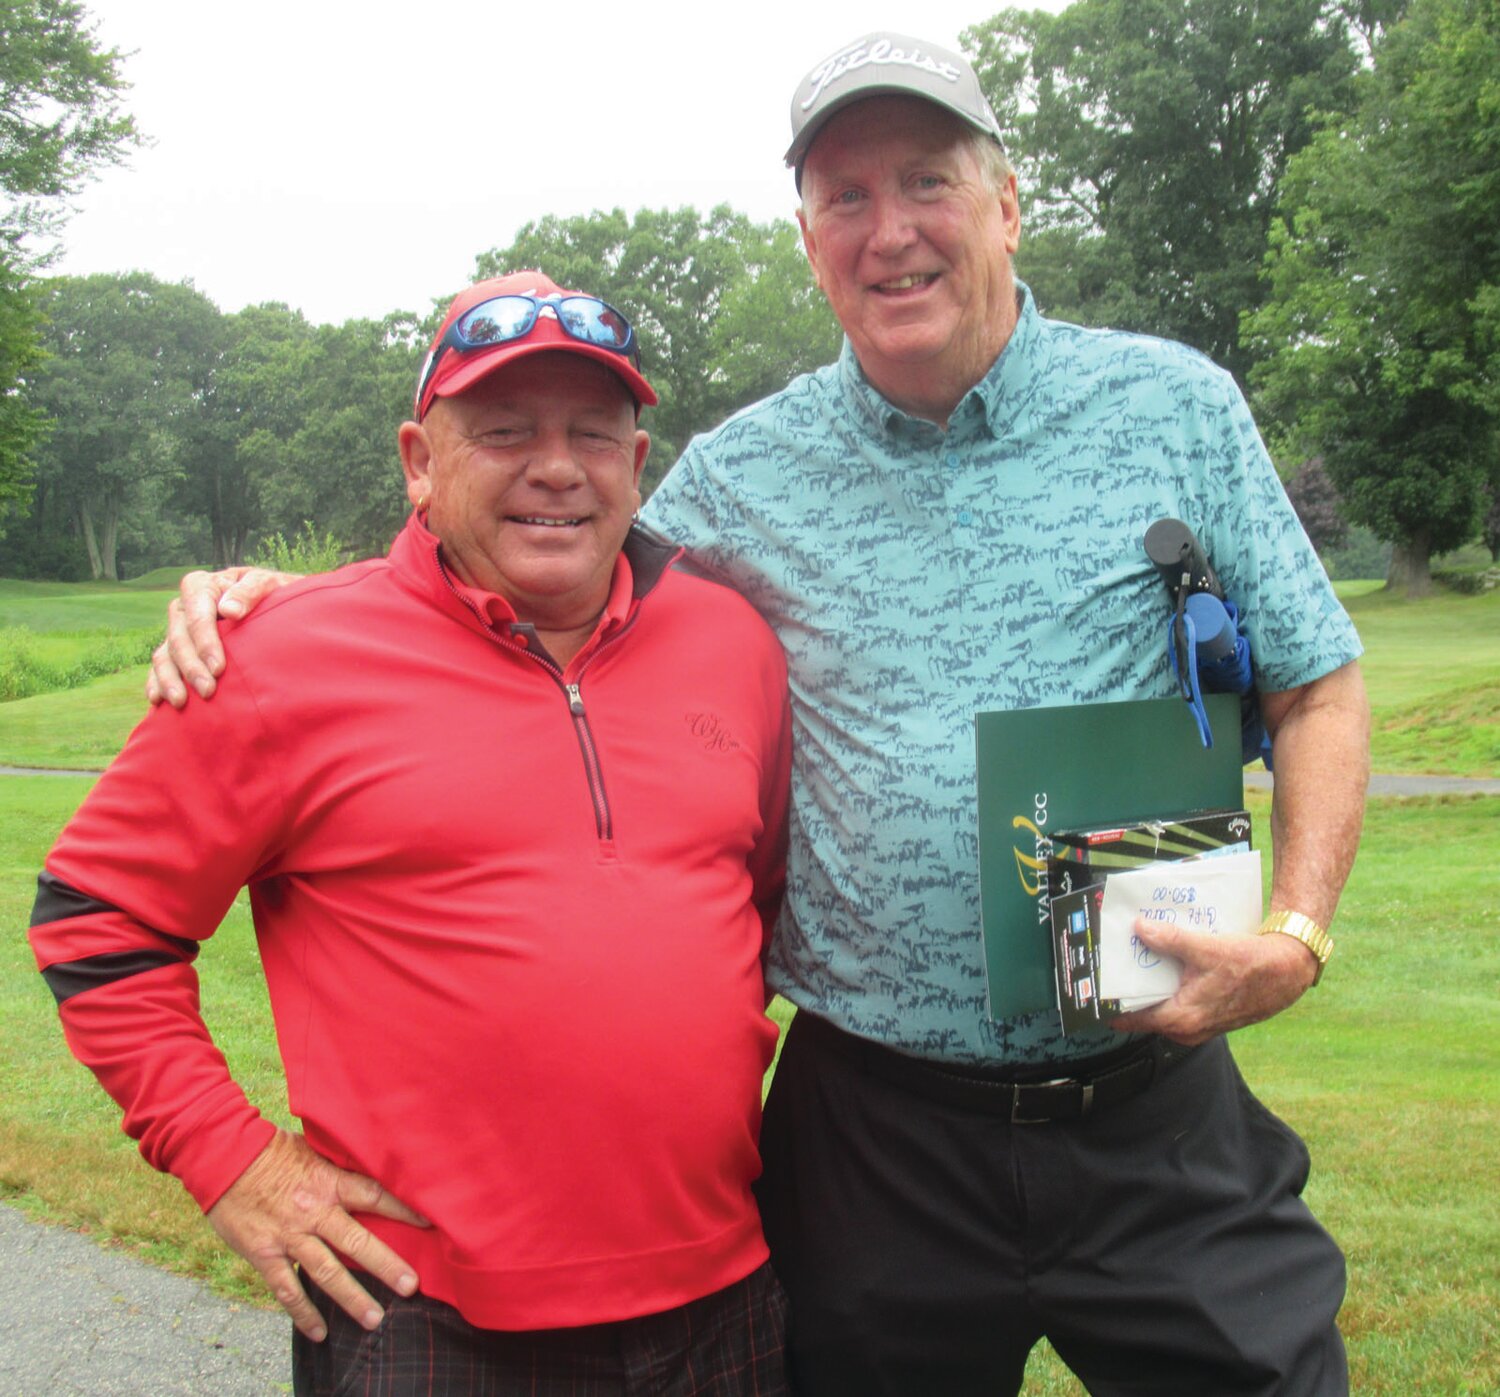 FAMILY FRIEND: John Graham (left), who has been a long-time friend of the Hopkins family, served as the official greeter to Cranston Mayor Ken Hopkins at last week’s highly successful scholarship fund golf tourney. (Herald photos by Pete Fontaine)